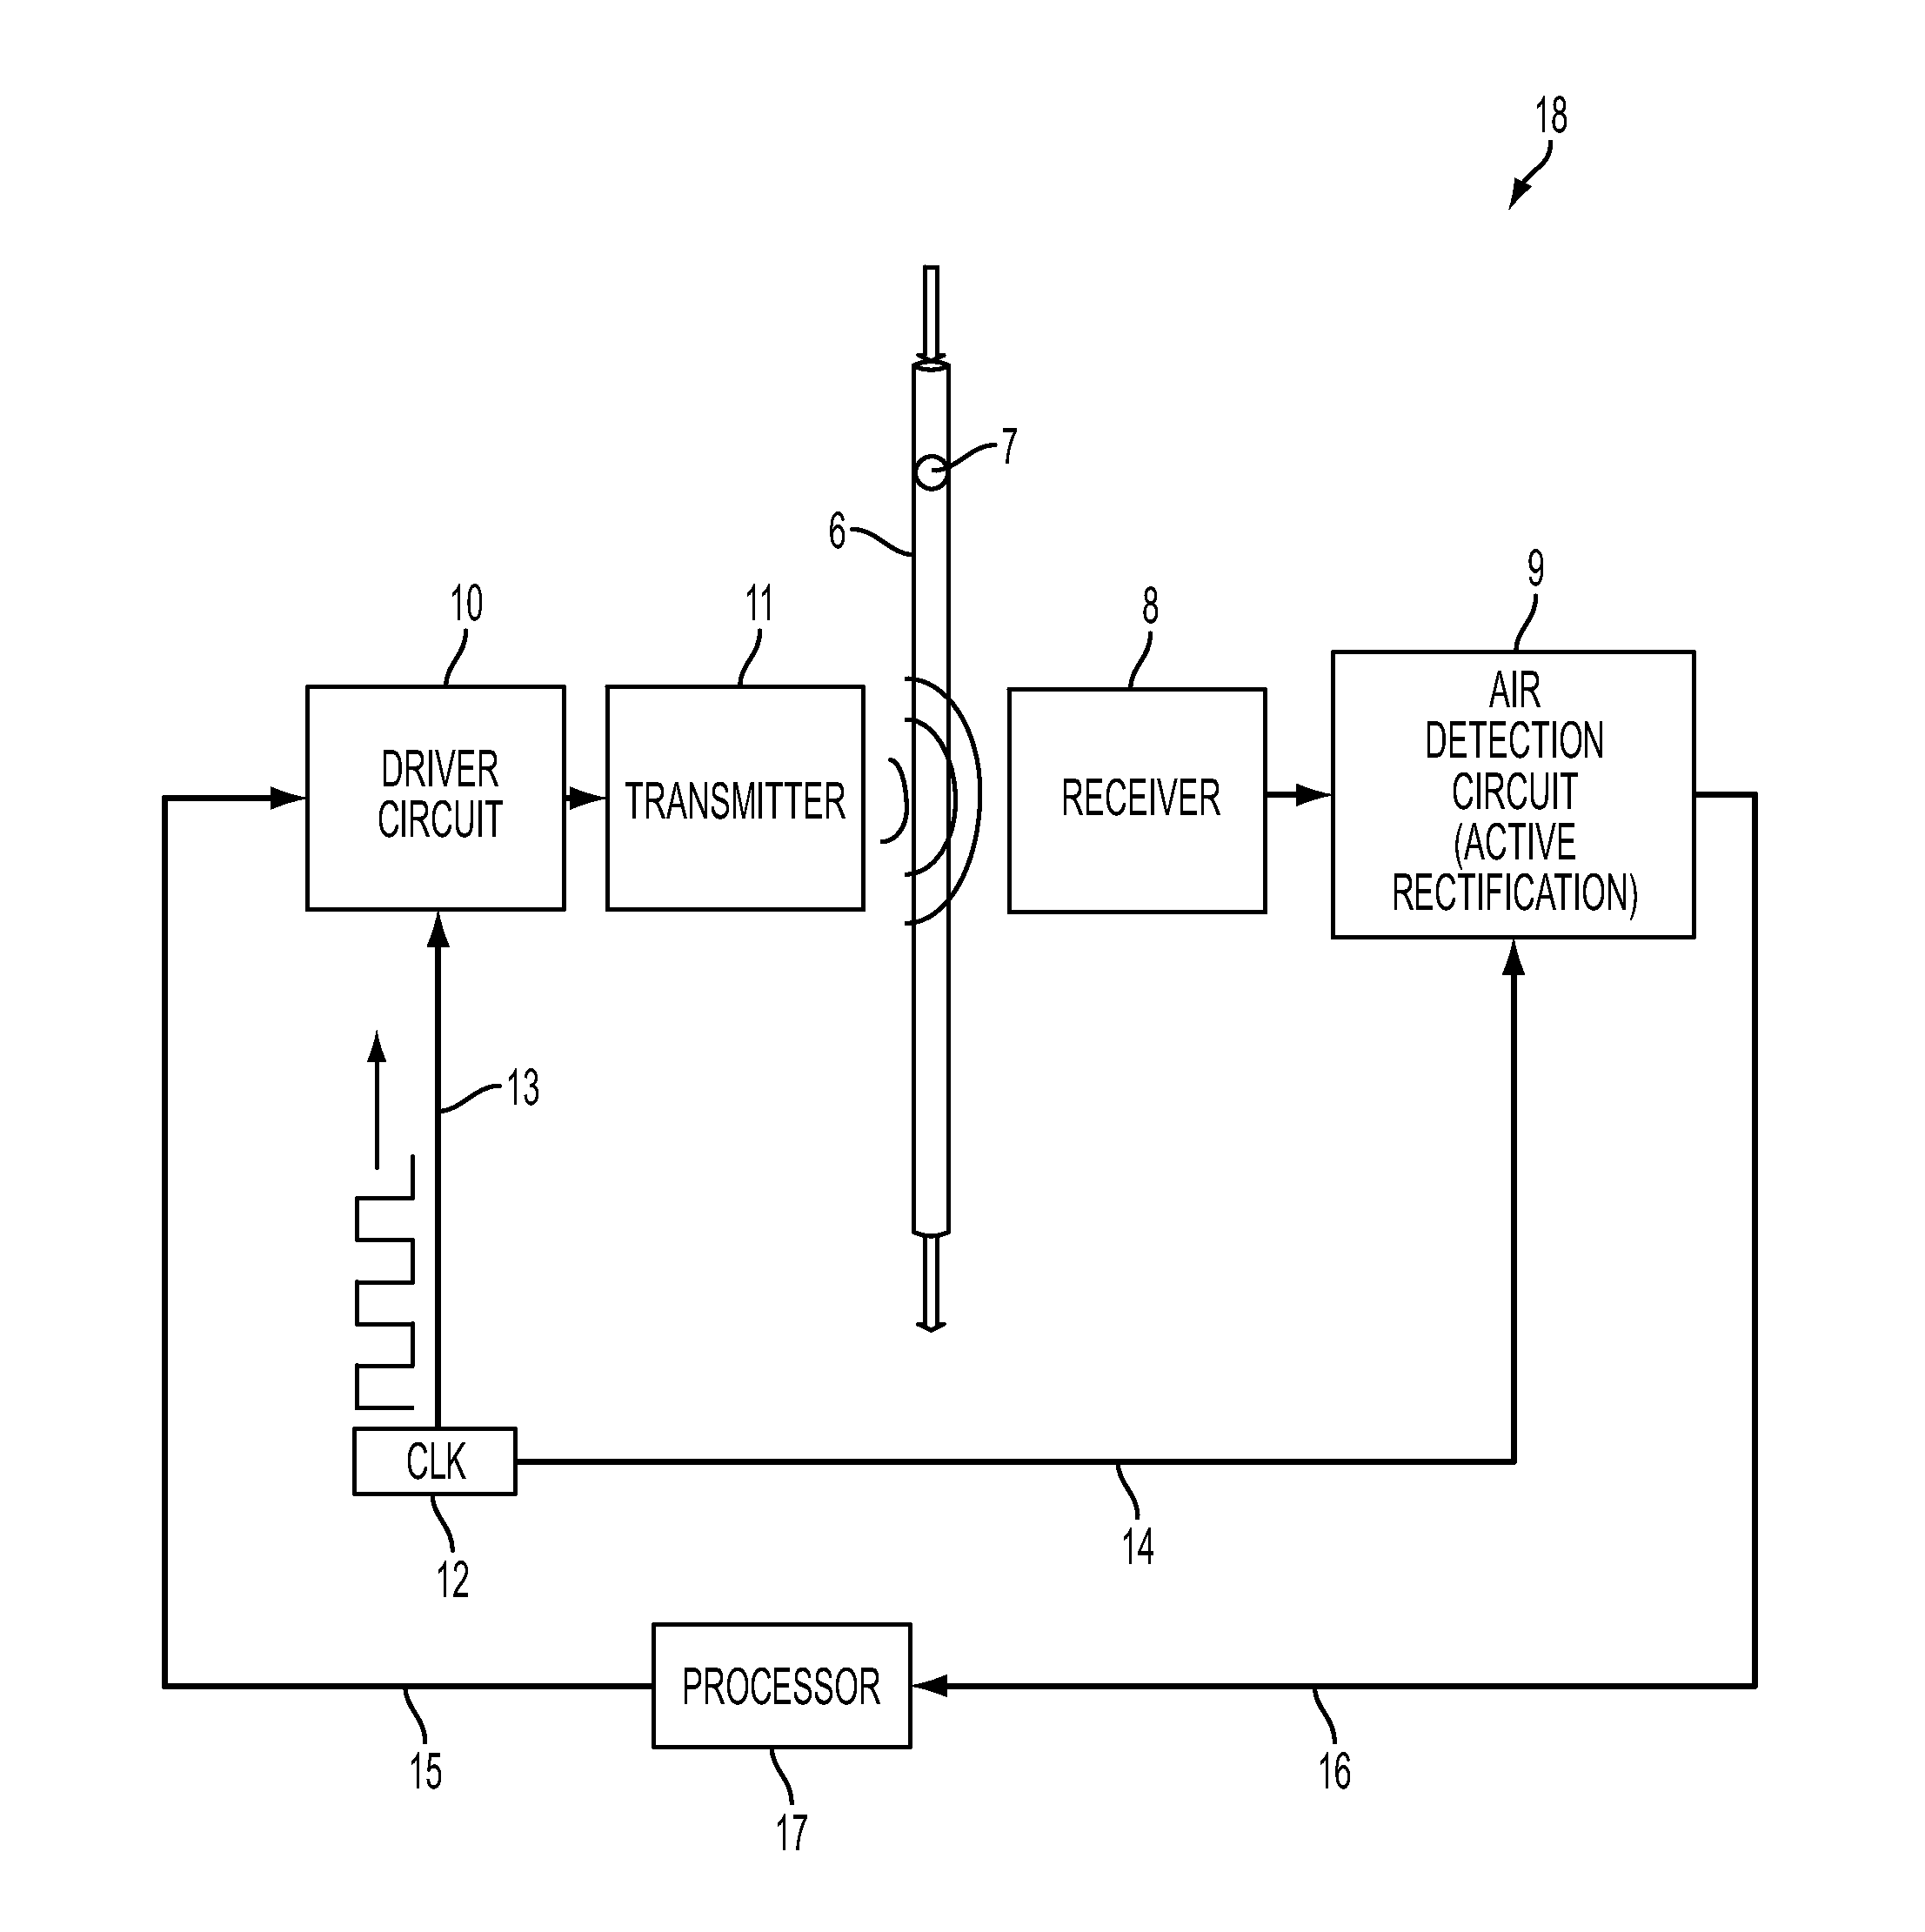 System, Method, and Apparatus for Detecting Air in a Fluid Line Using Active Rectification